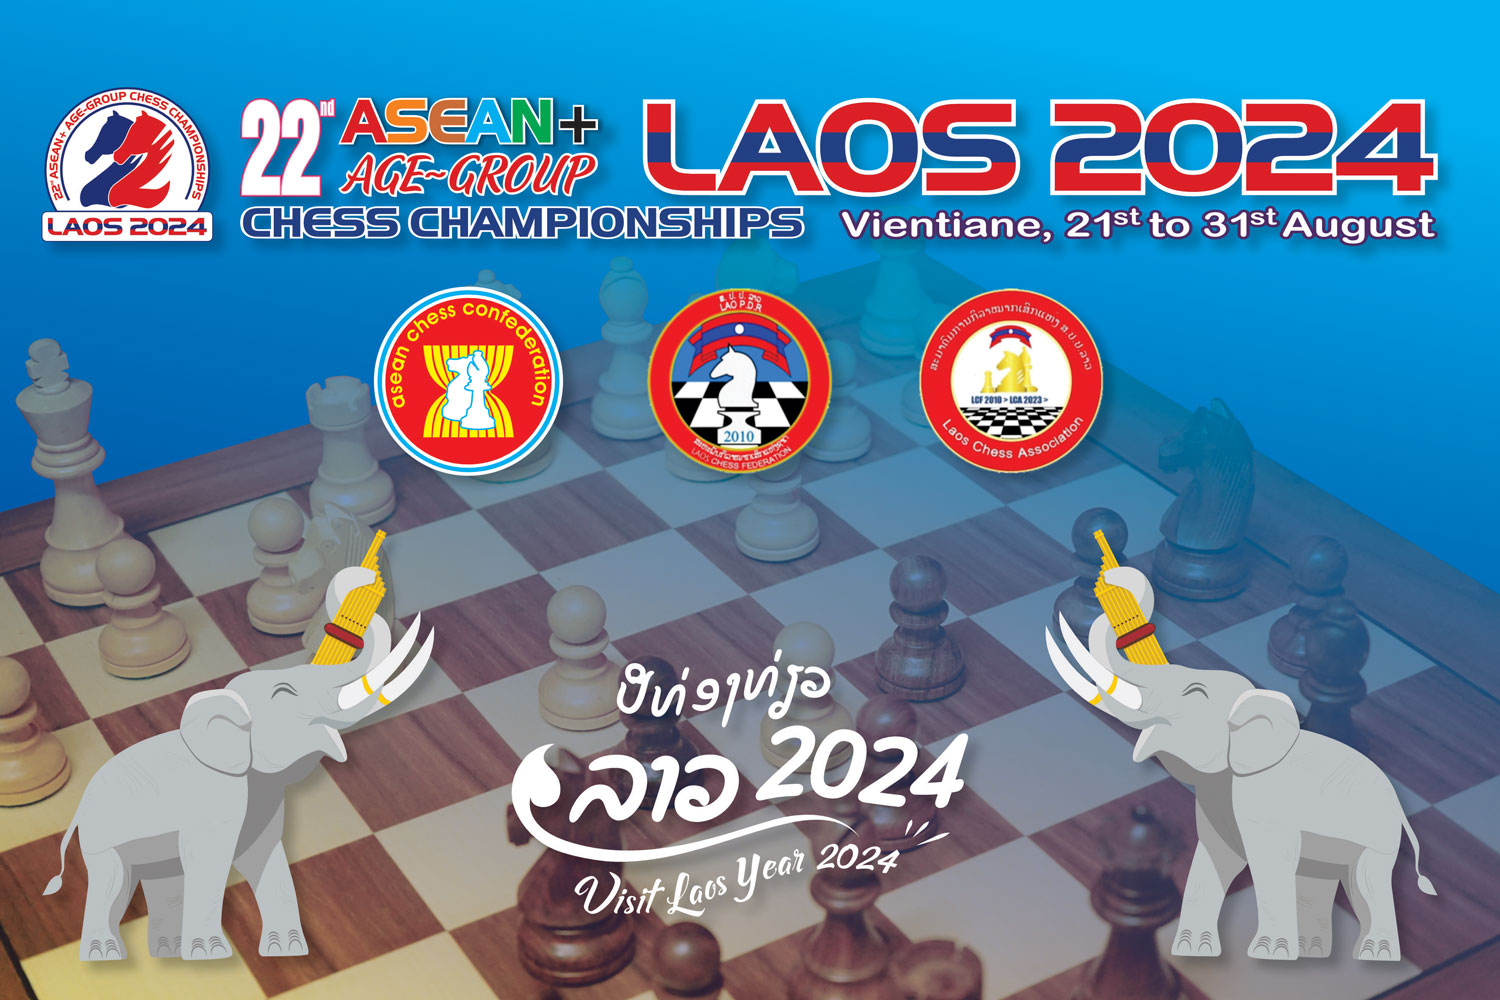 22nd ASEAN+ Age-group Chess Championships 2024